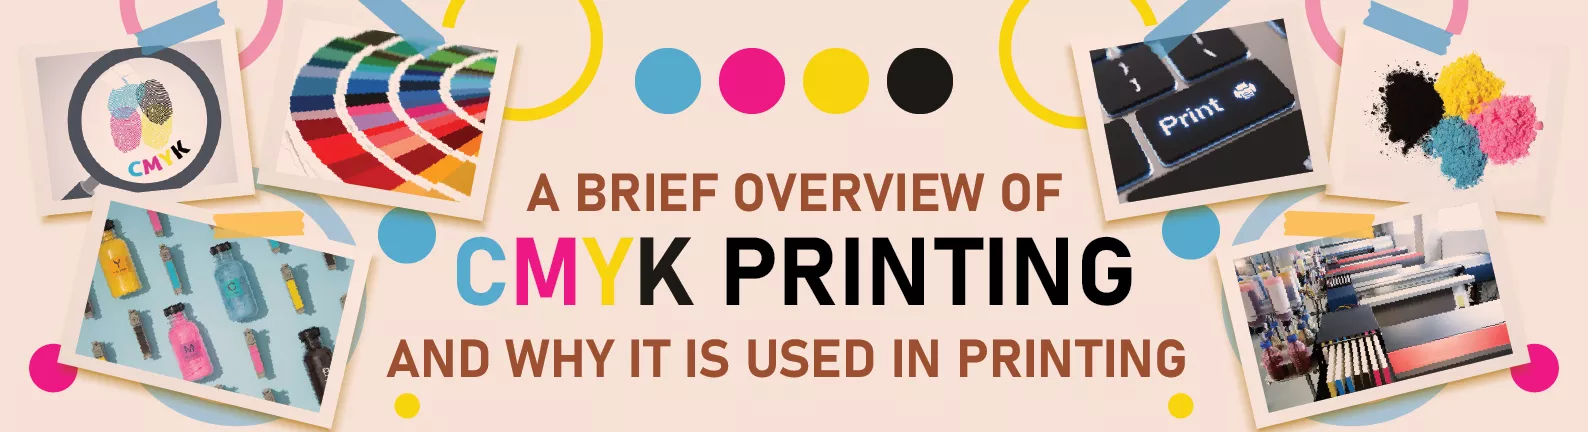 A Brief Overview of CMYK Printing and Why It Is Used in Printing